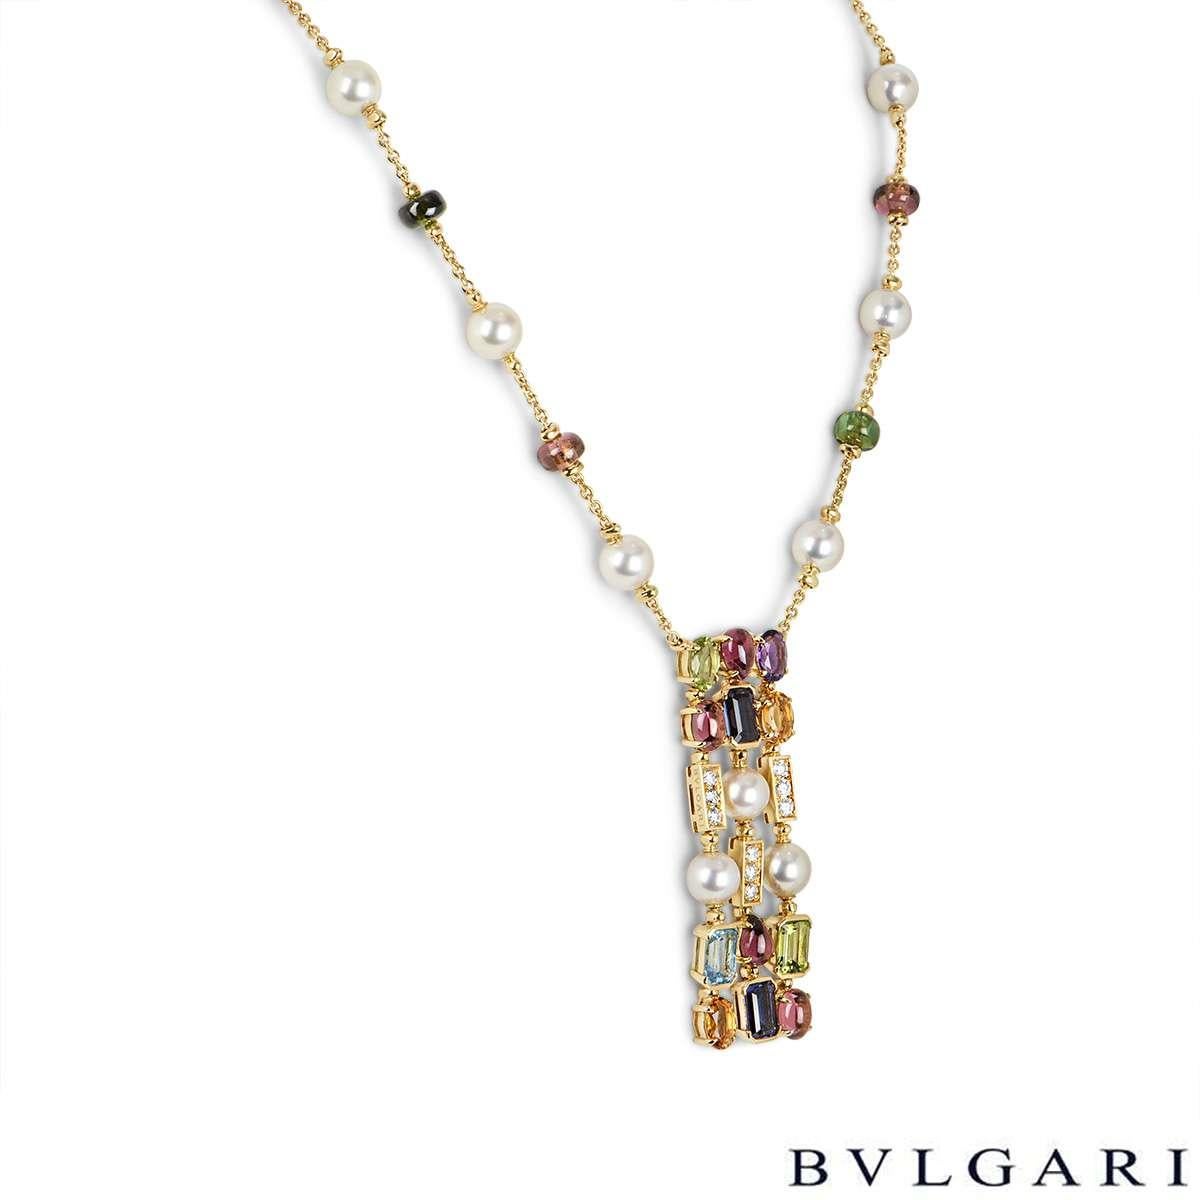 A beautiful 18k yellow gold necklace from the Allegra collection by Bvlgari. The necklace is set with round brilliant cut diamonds, pearls and a mixture of fancy cut gemstones. The gemstones consist of tourmaline, peridot, citrine, topaz, amethyst